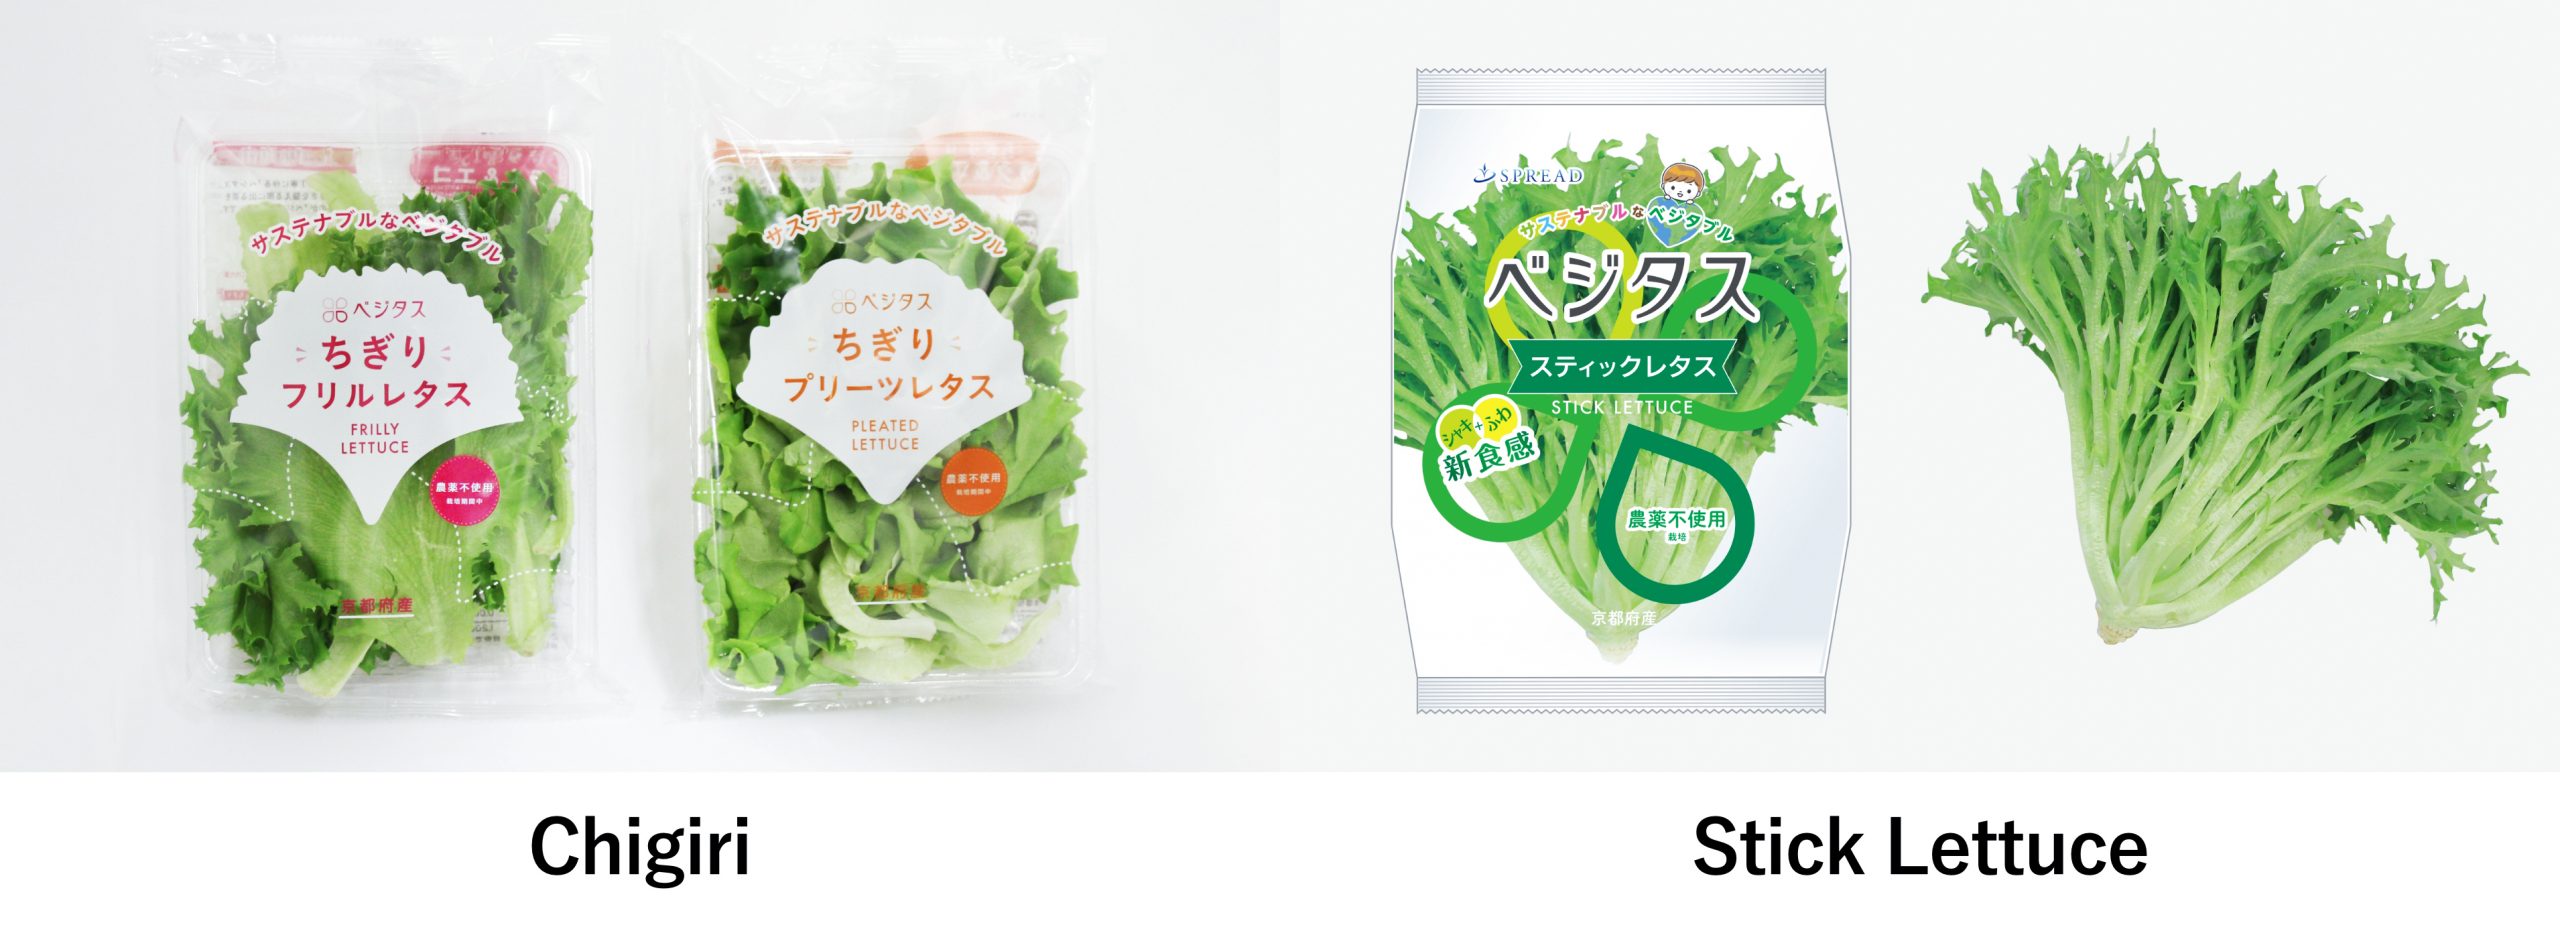 An image of Chigiri and Stick Lettuce products